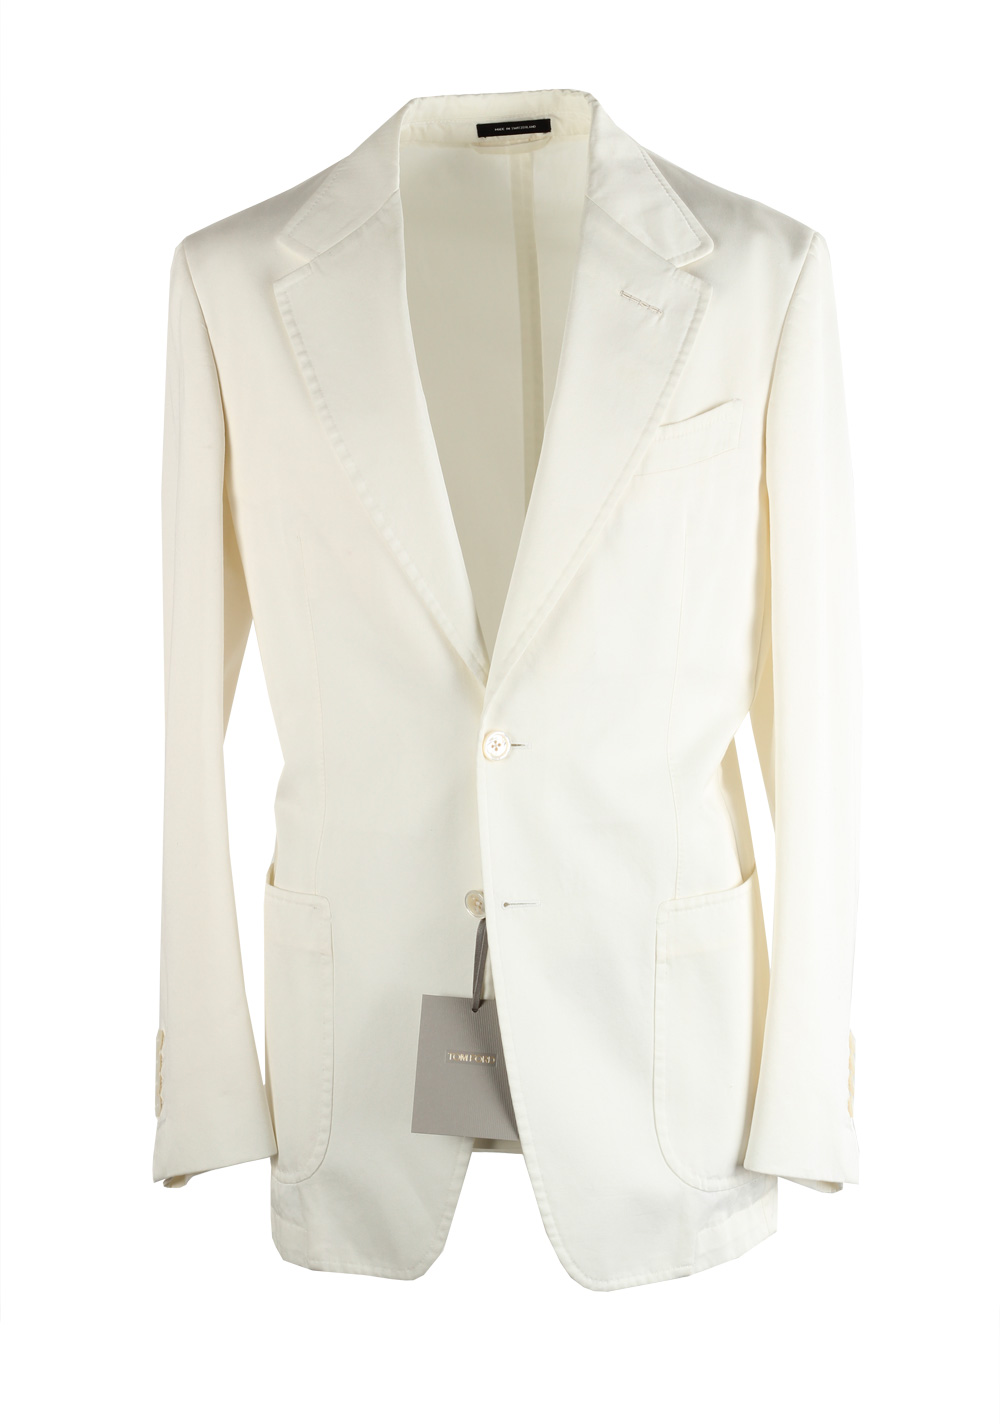 TOM FORD Shelton Off White Sport Coat Size 46 / 36R U.S. In Cotton ...